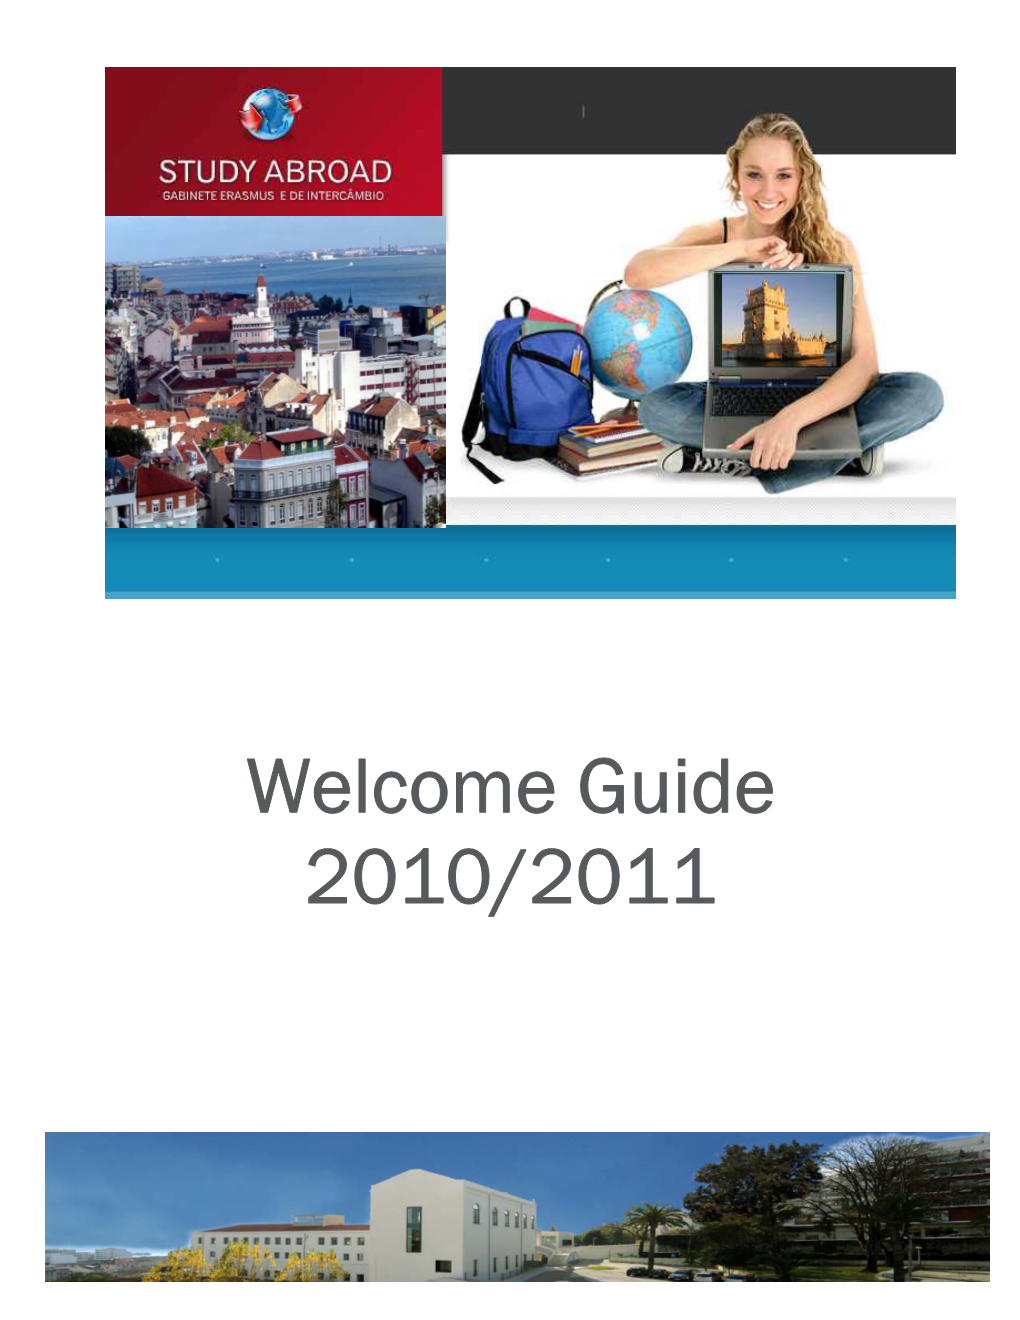 Welcome Guide 2010/2011